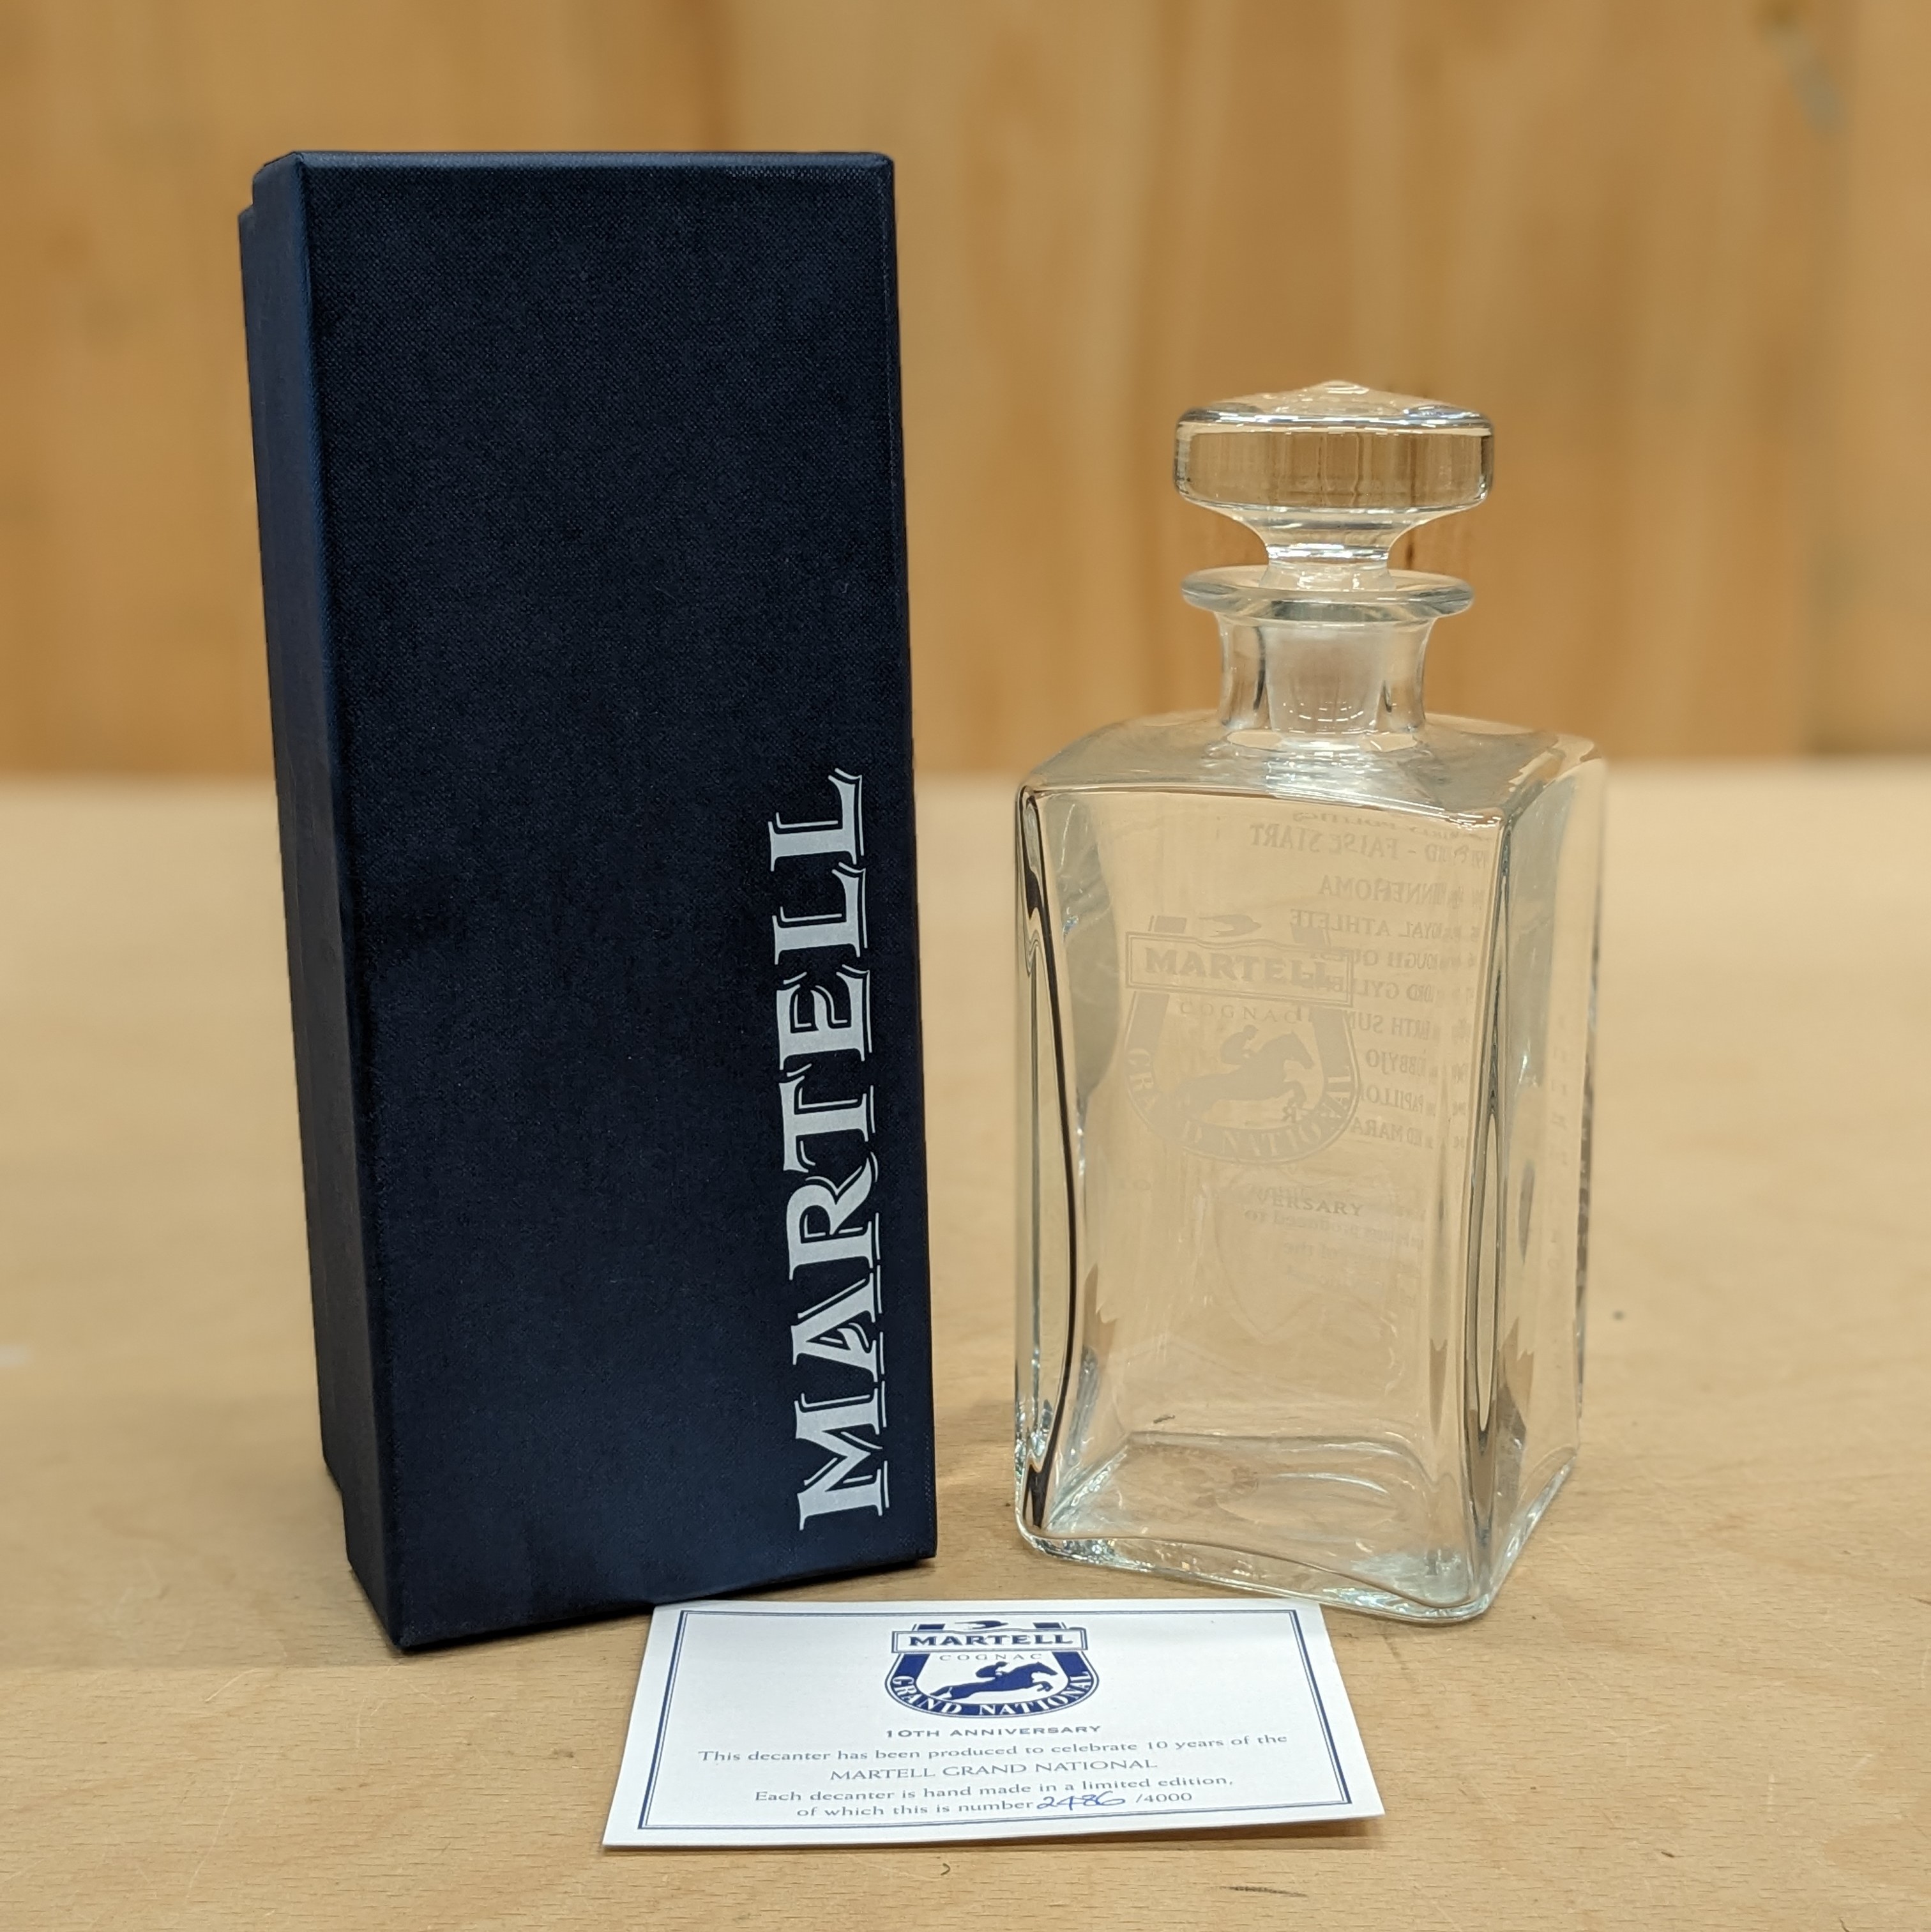 Martell Decanter Limited Edition Main Picture showing presentation box and certificate